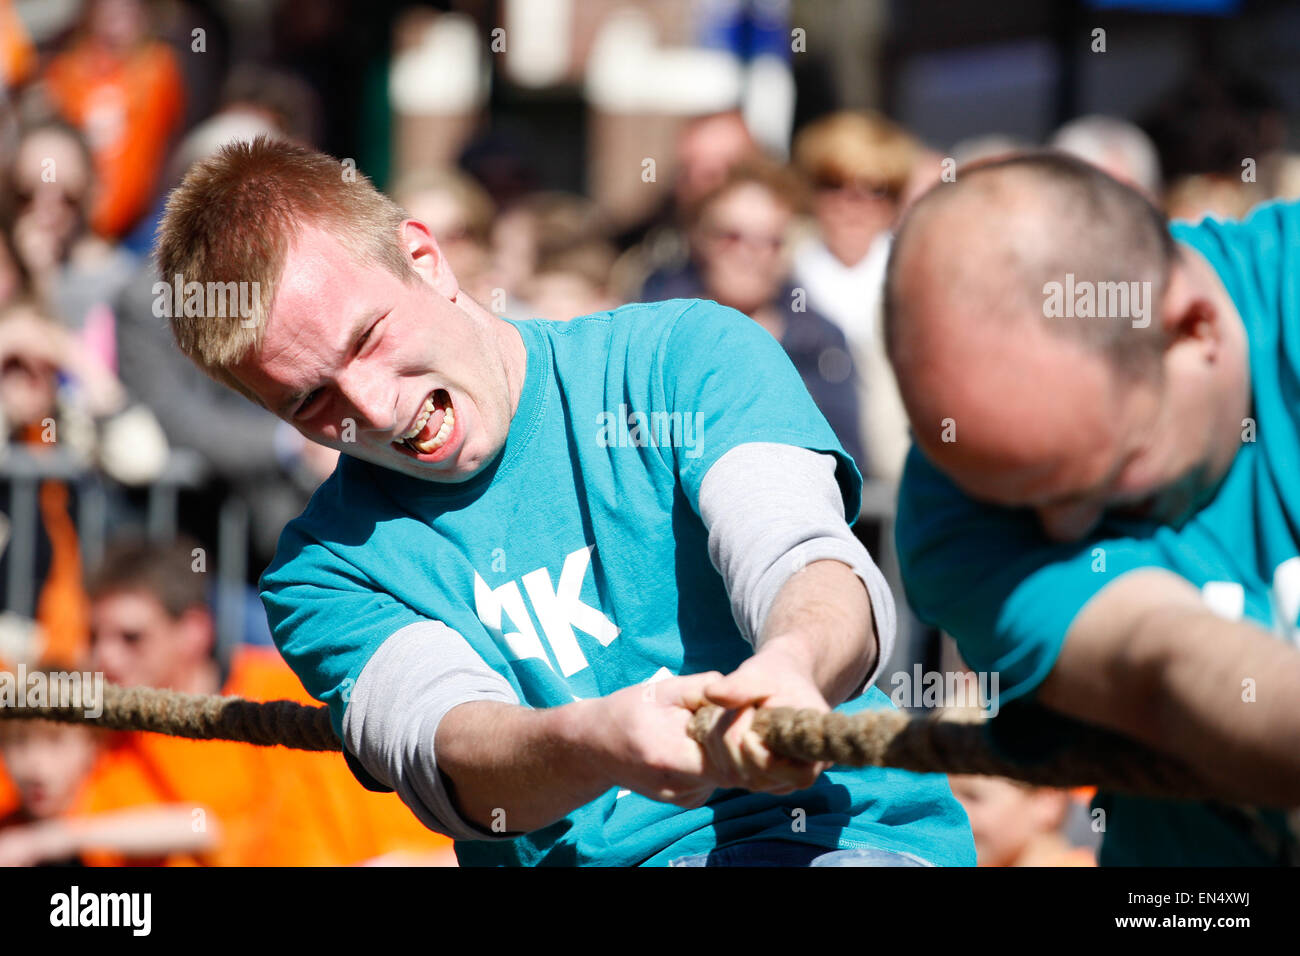 Voorschoten, Netherlands. 27th, April 2015. All accross the country municipalities organised festivities, fares and public entertainment for the annyal celebration of King's Day. Credit:  Jaap Arriens/Alamy Live News Stock Photo